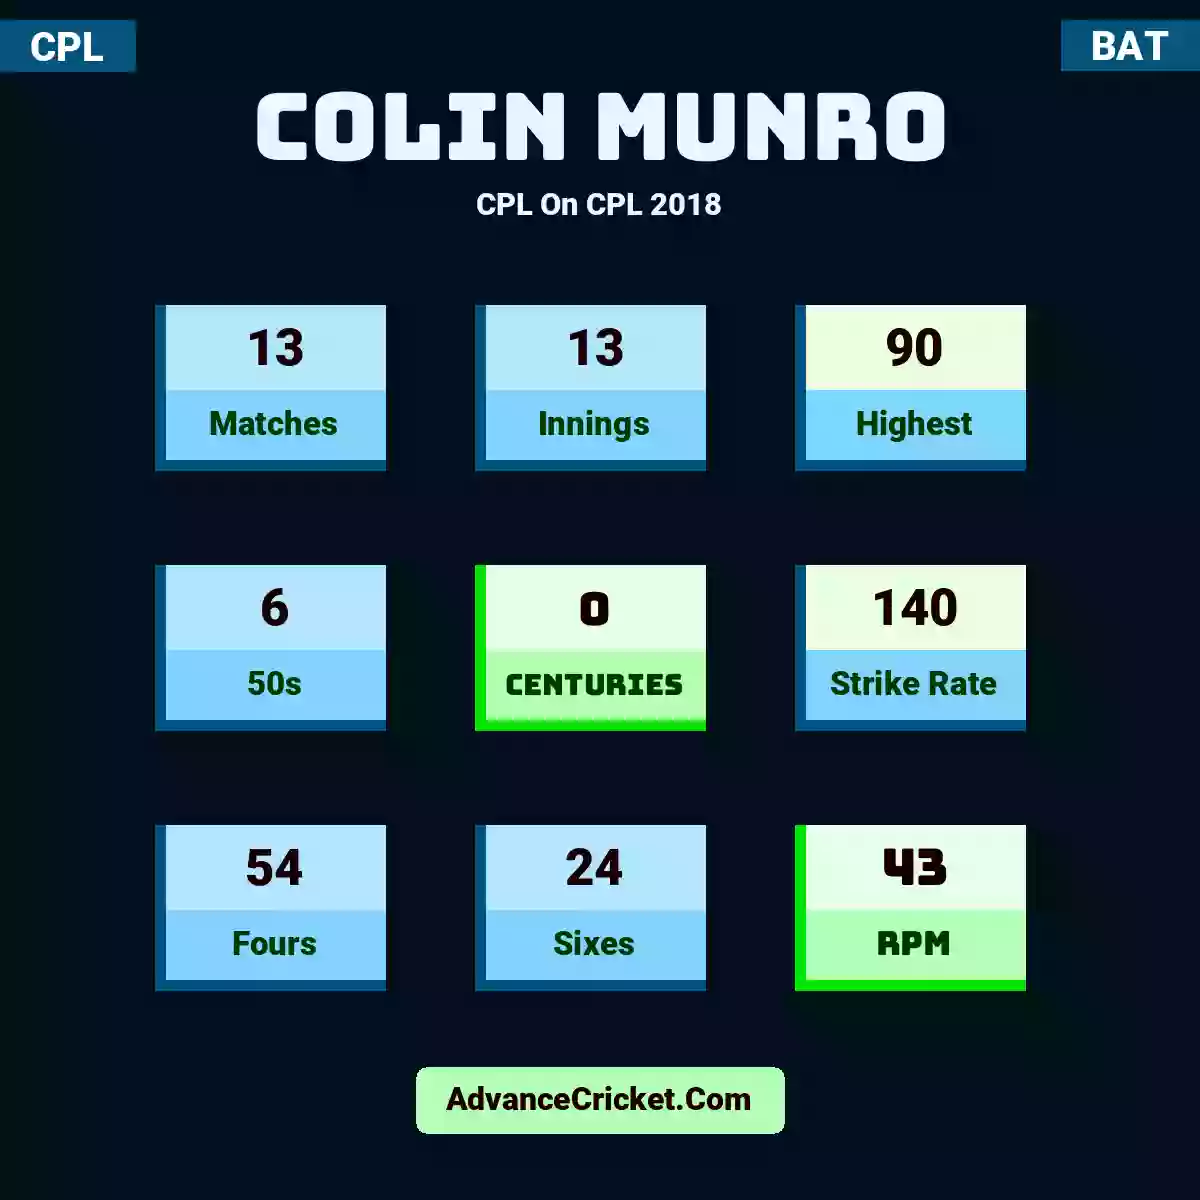 Colin Munro CPL  On CPL 2018, Colin Munro played 13 matches, scored 90 runs as highest, 6 half-centuries, and 0 centuries, with a strike rate of 140. C.Munro hit 54 fours and 24 sixes, with an RPM of 43.